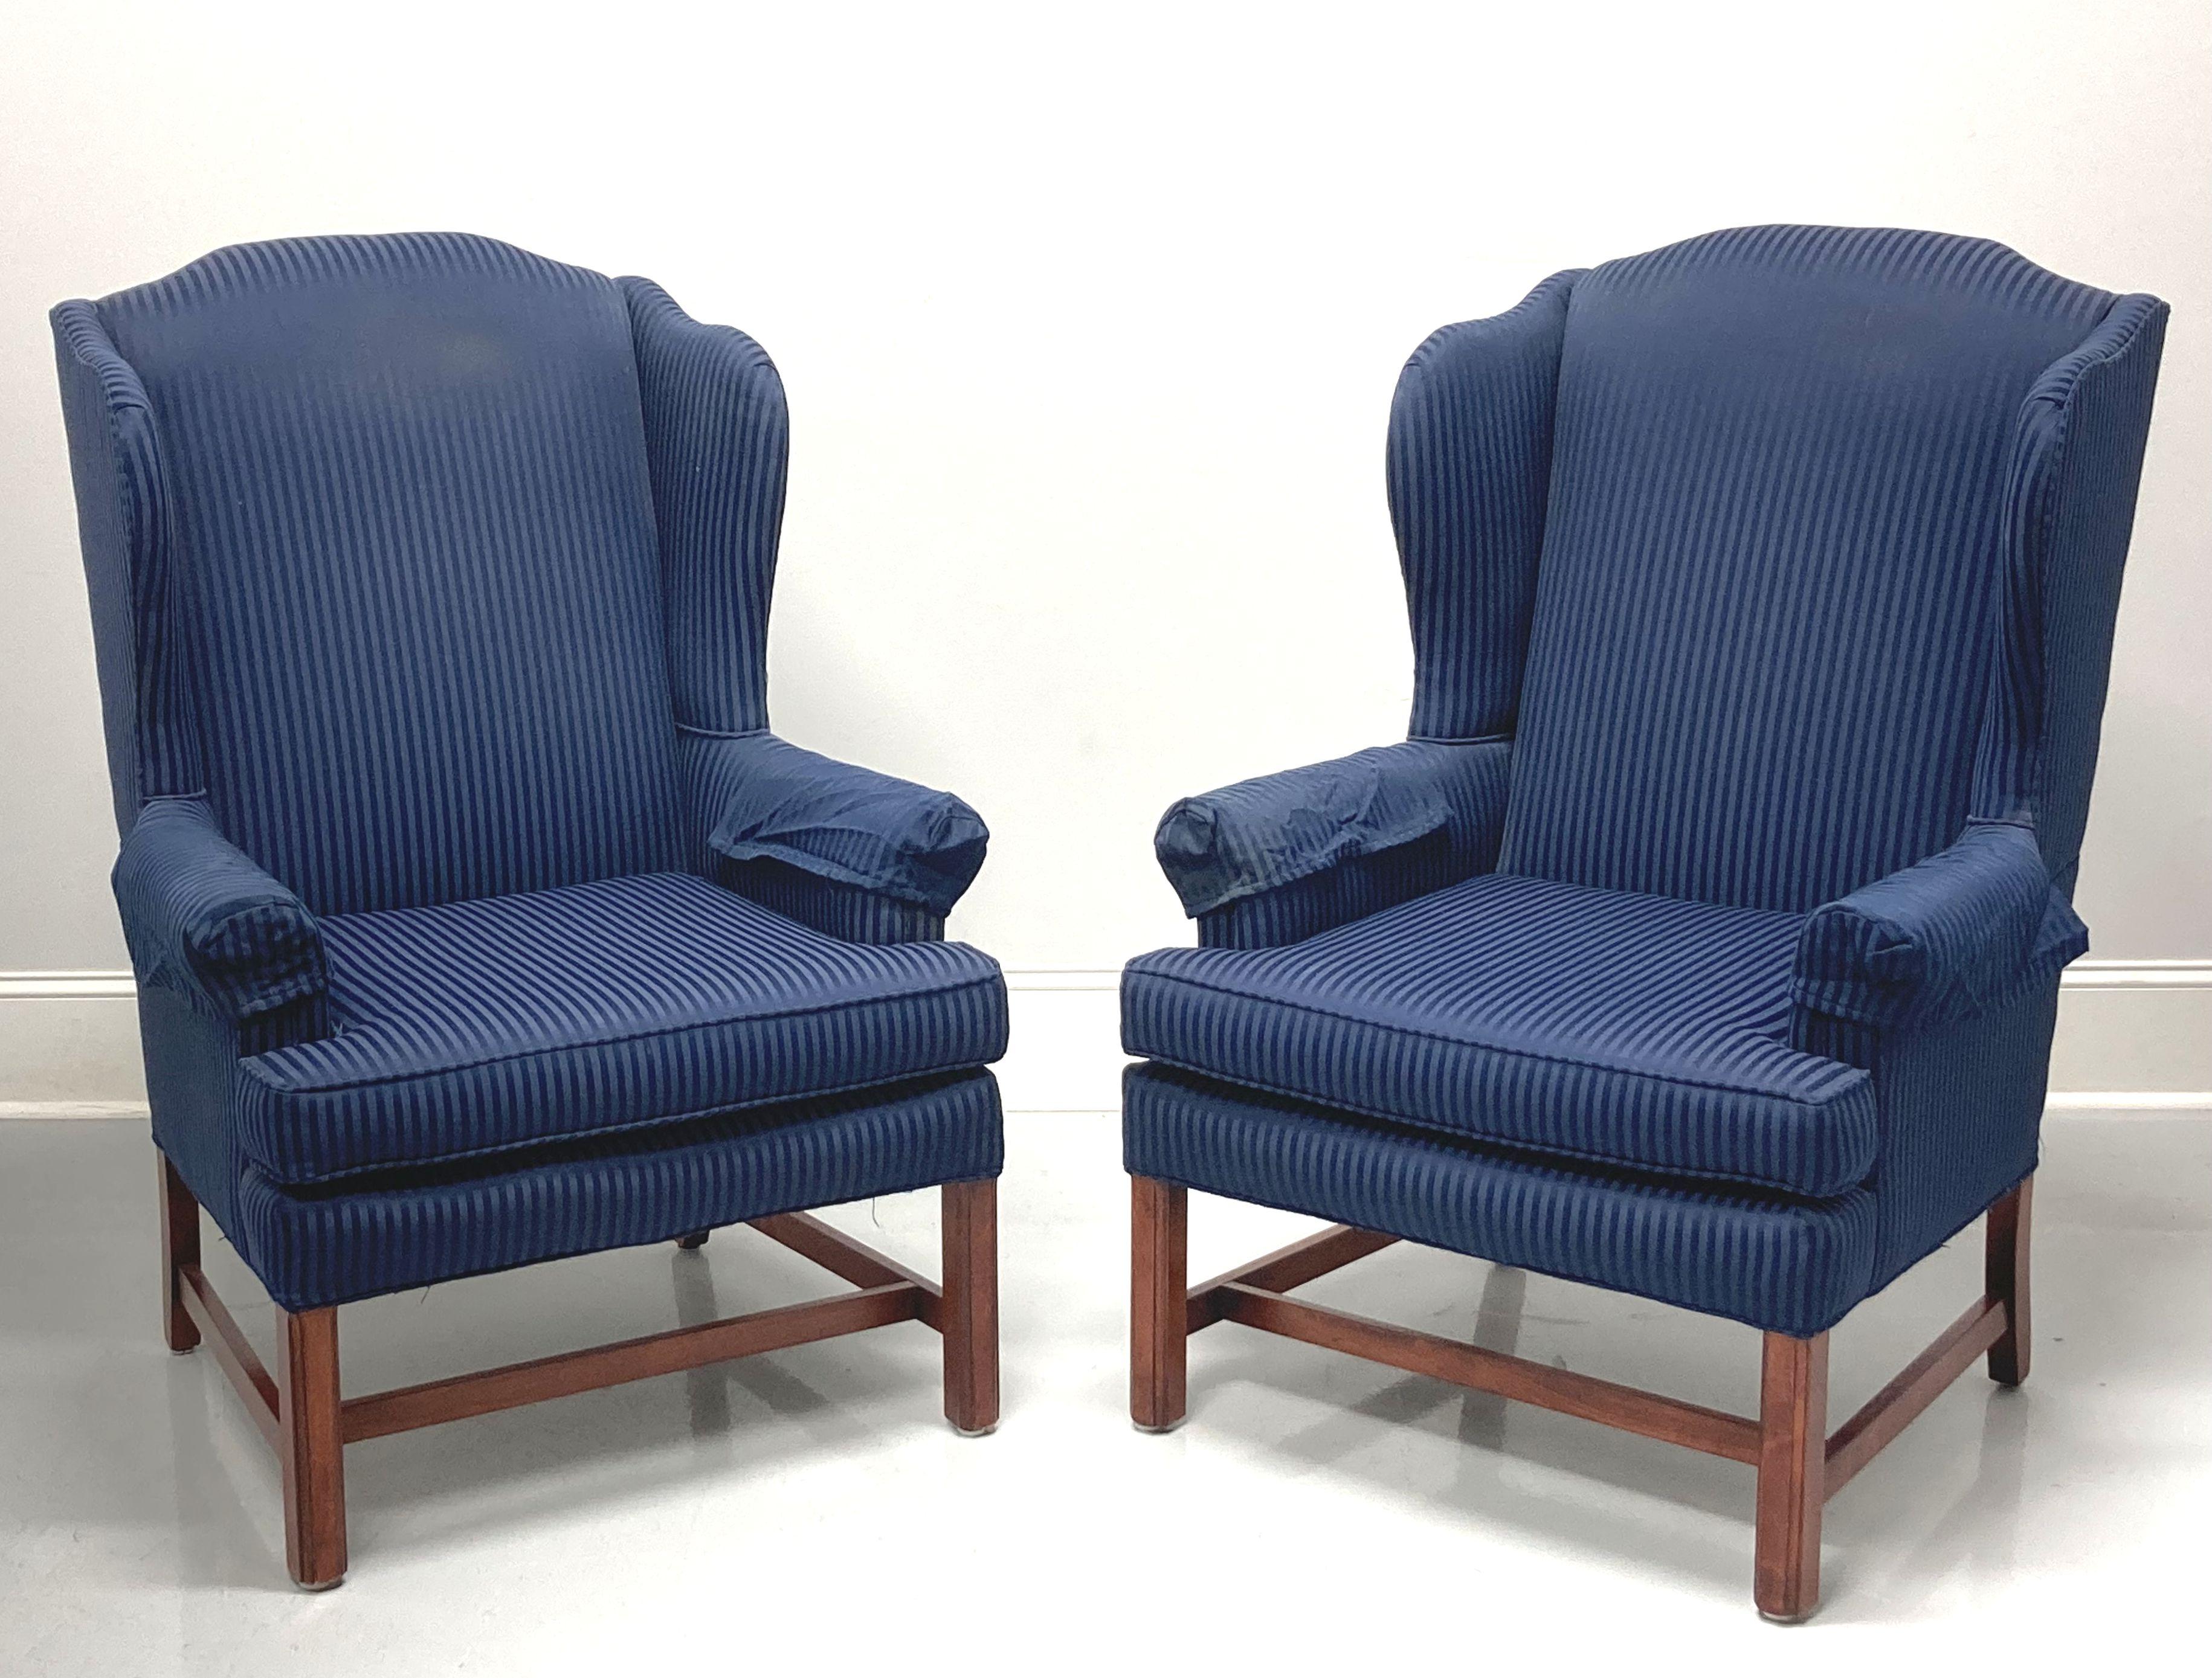 Vintage Mahogany Frame Chippendale Style Wing Back Chairs in Navy - Pair For Sale 2